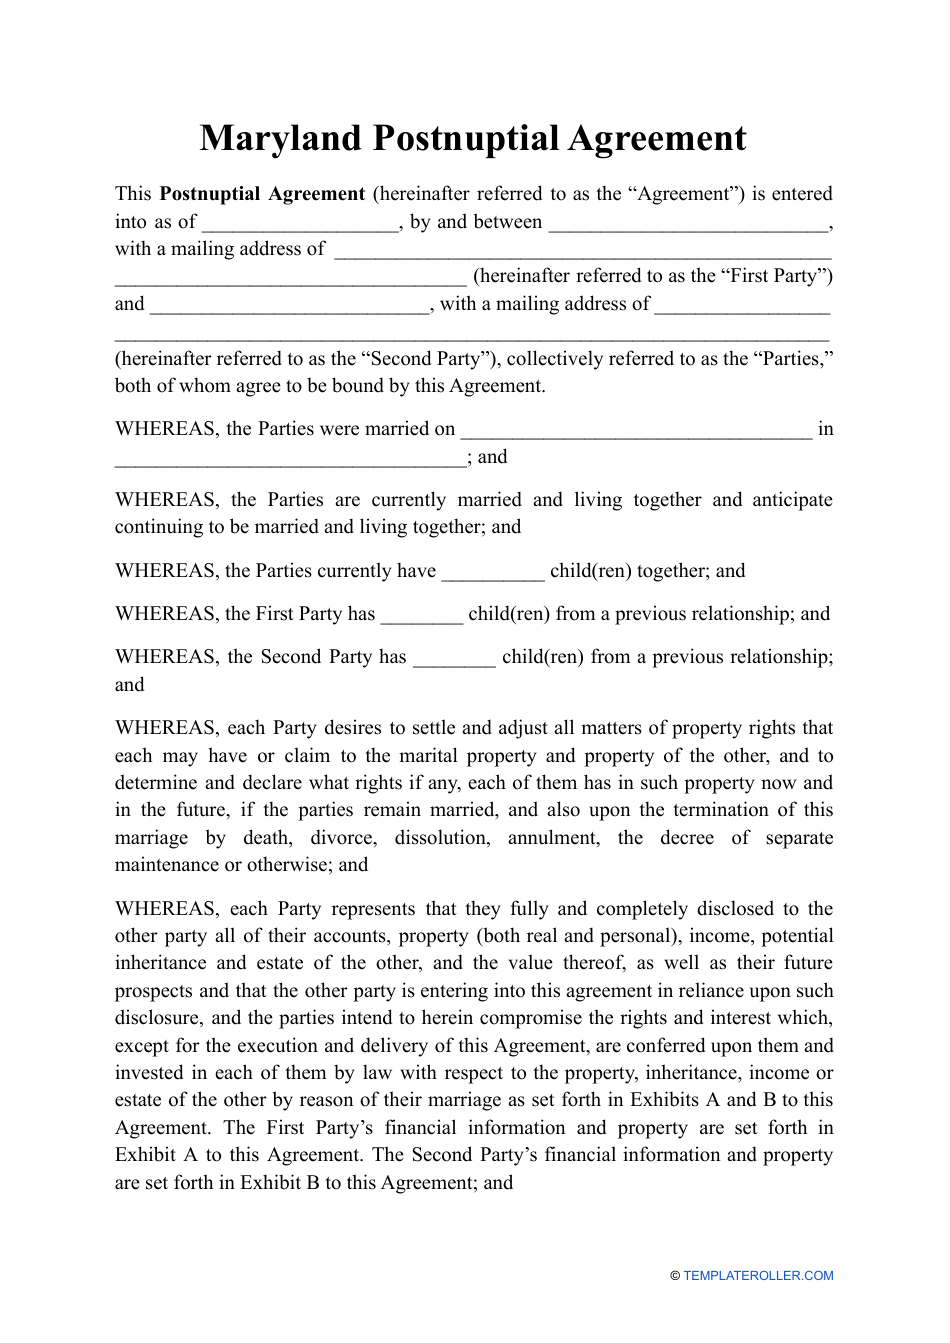 Postnuptial Agreement Template - Maryland, Page 1